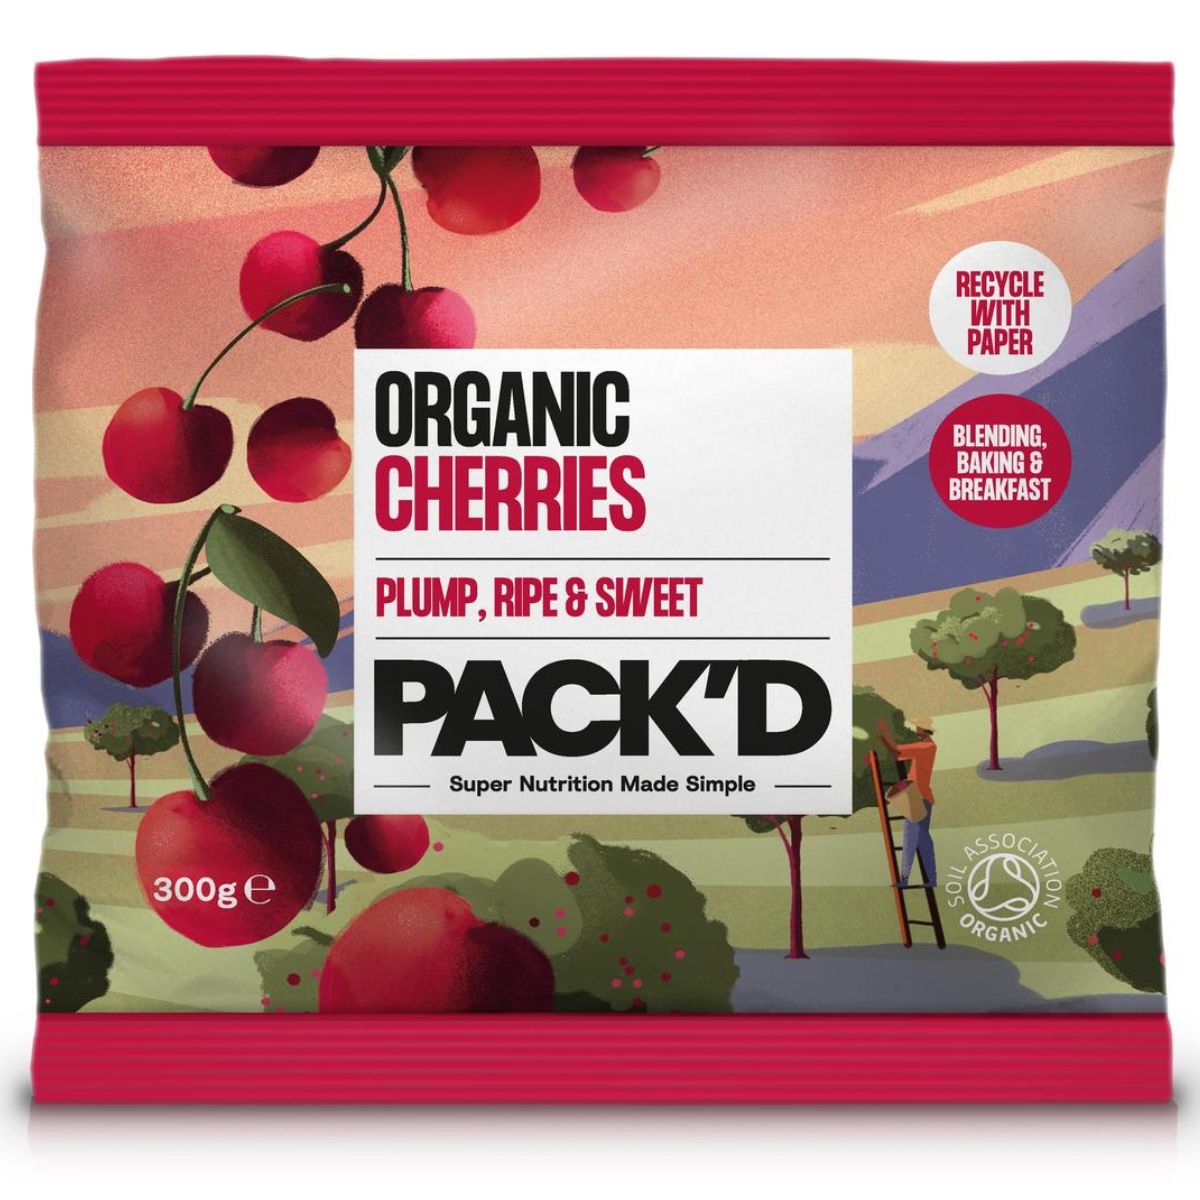 A Packd - Organic & Sweet Pitted Cherries - 300g in a pouch.